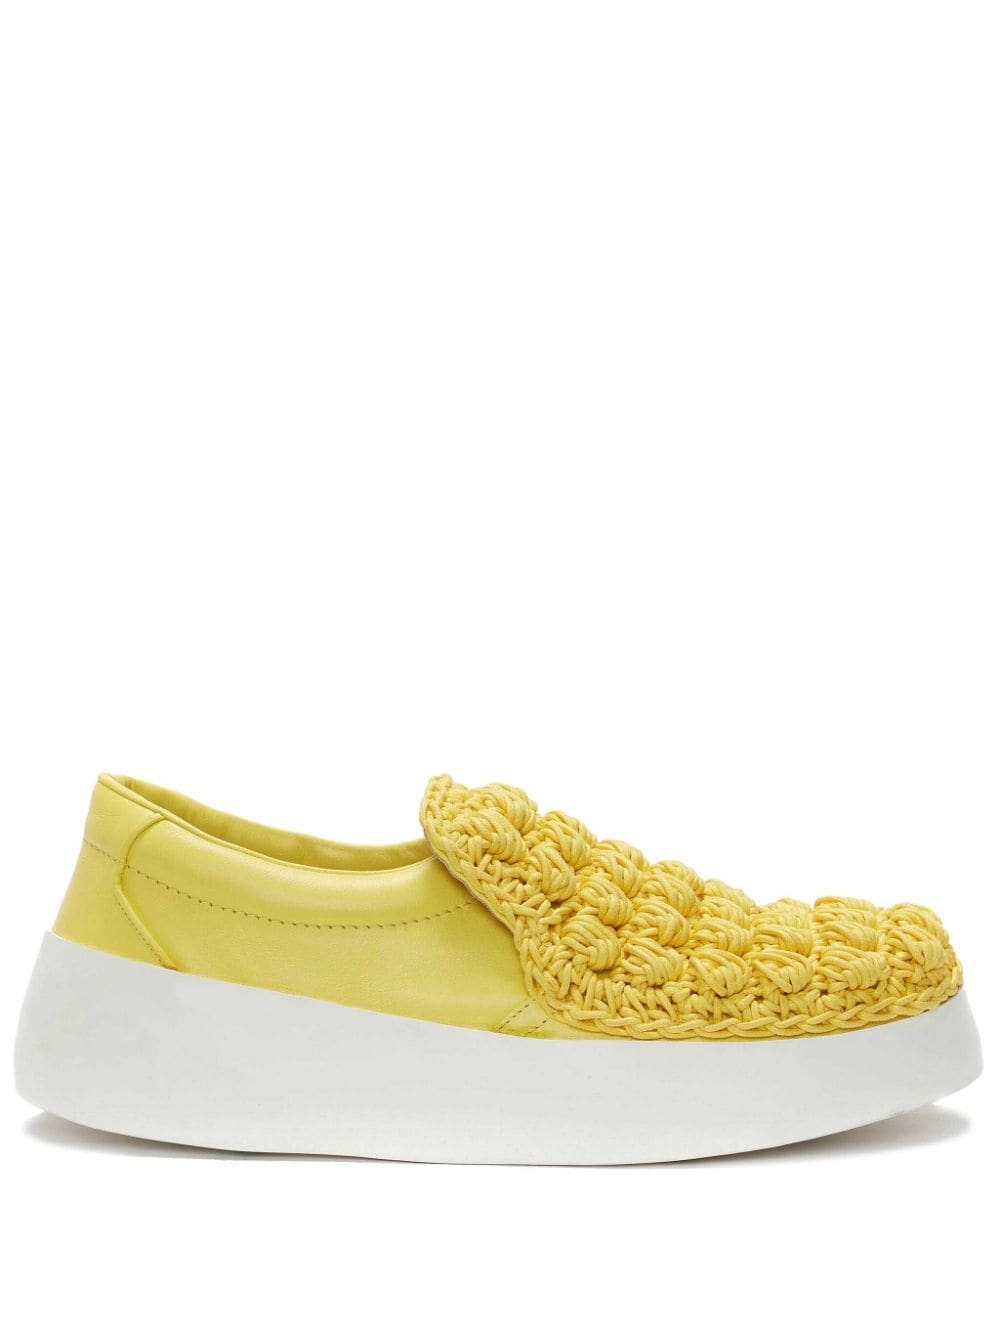 JW Anderson Popcorn panelled sneakers - Yellow